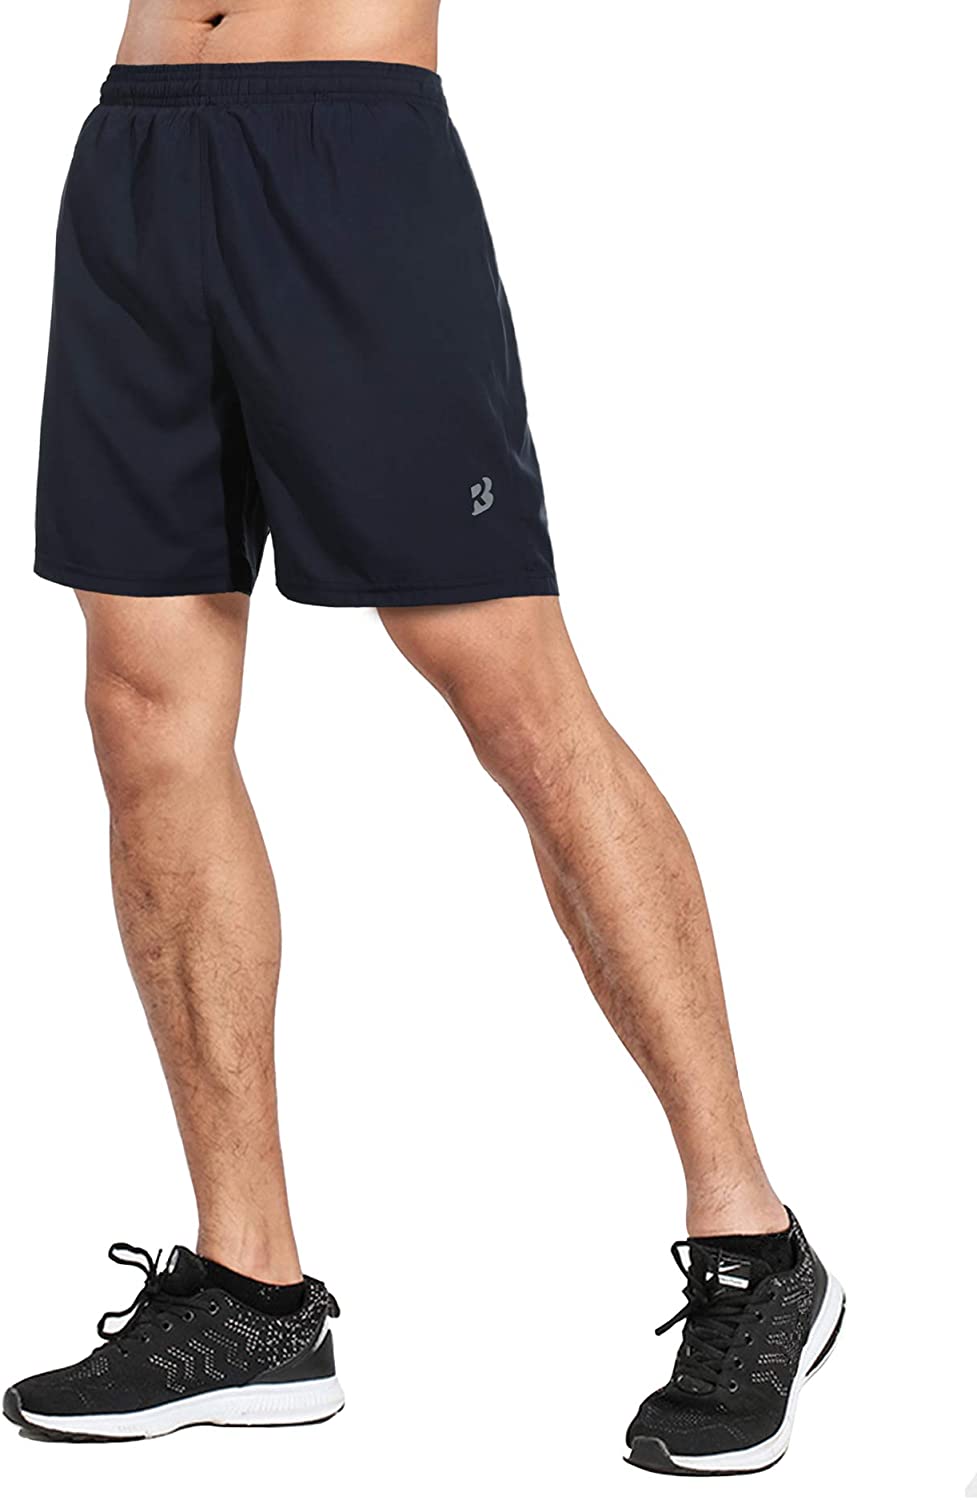  Workout Shorts 5 Inch for Push Pull Legs